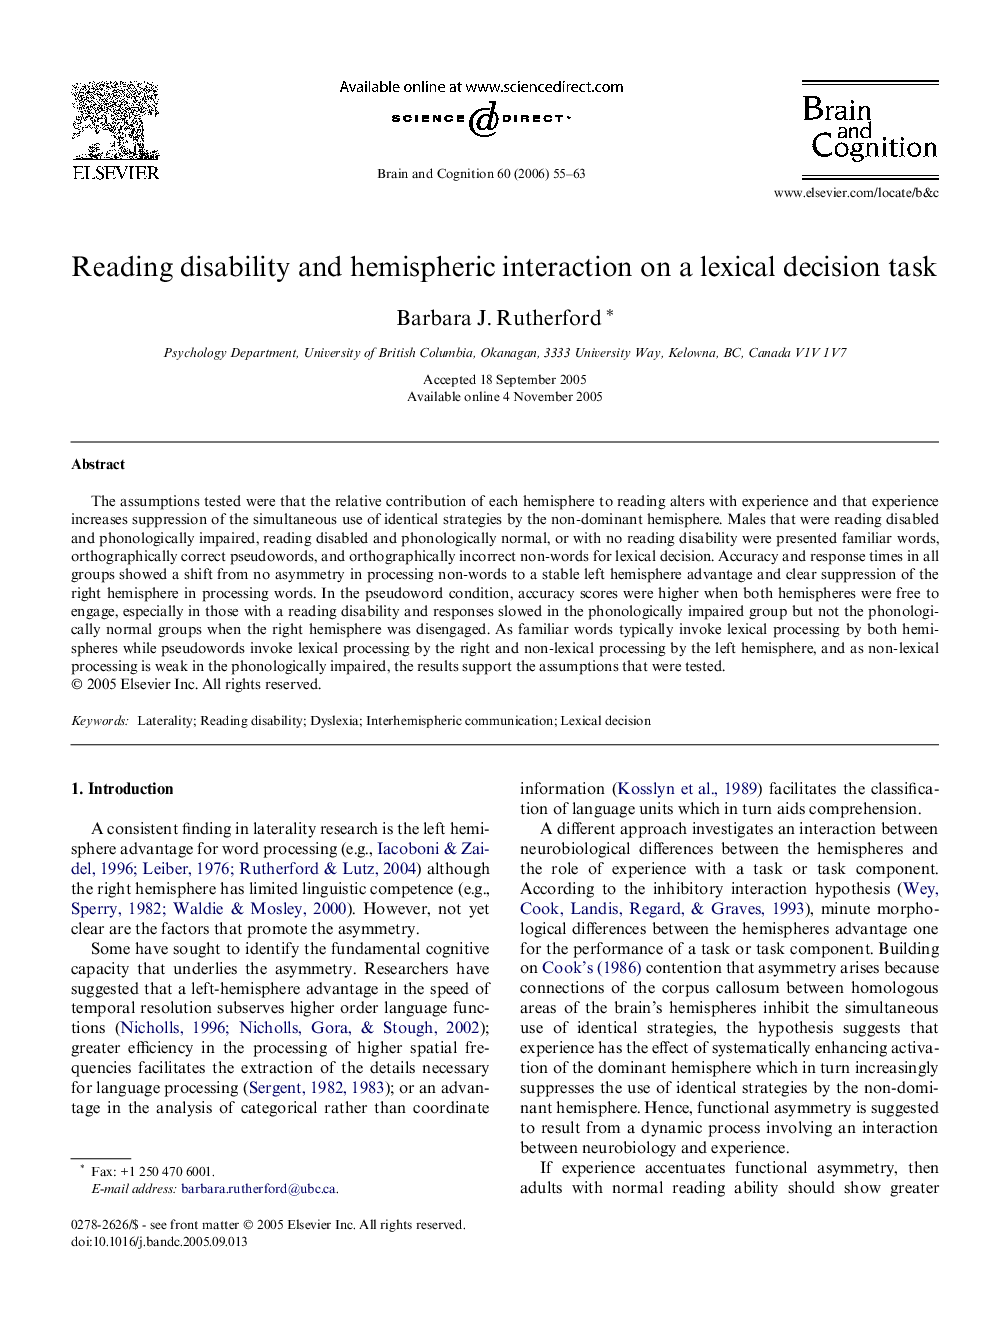 Reading disability and hemispheric interaction on a lexical decision task